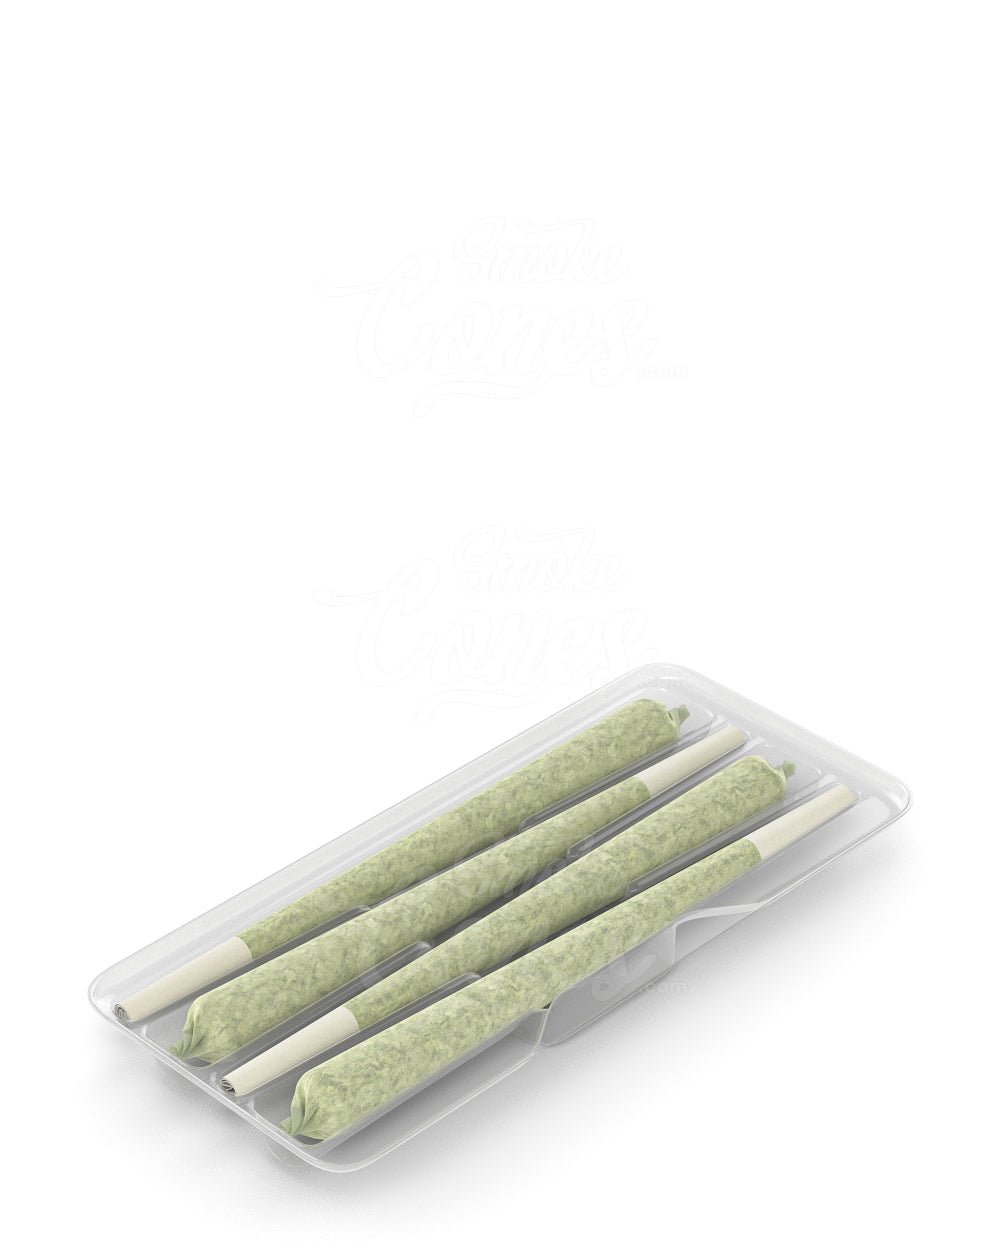 Clear Edible & Joint Box Plastic Insert Tray for 4 King Size 109mm Pre Rolled Cones 100/Box - 2